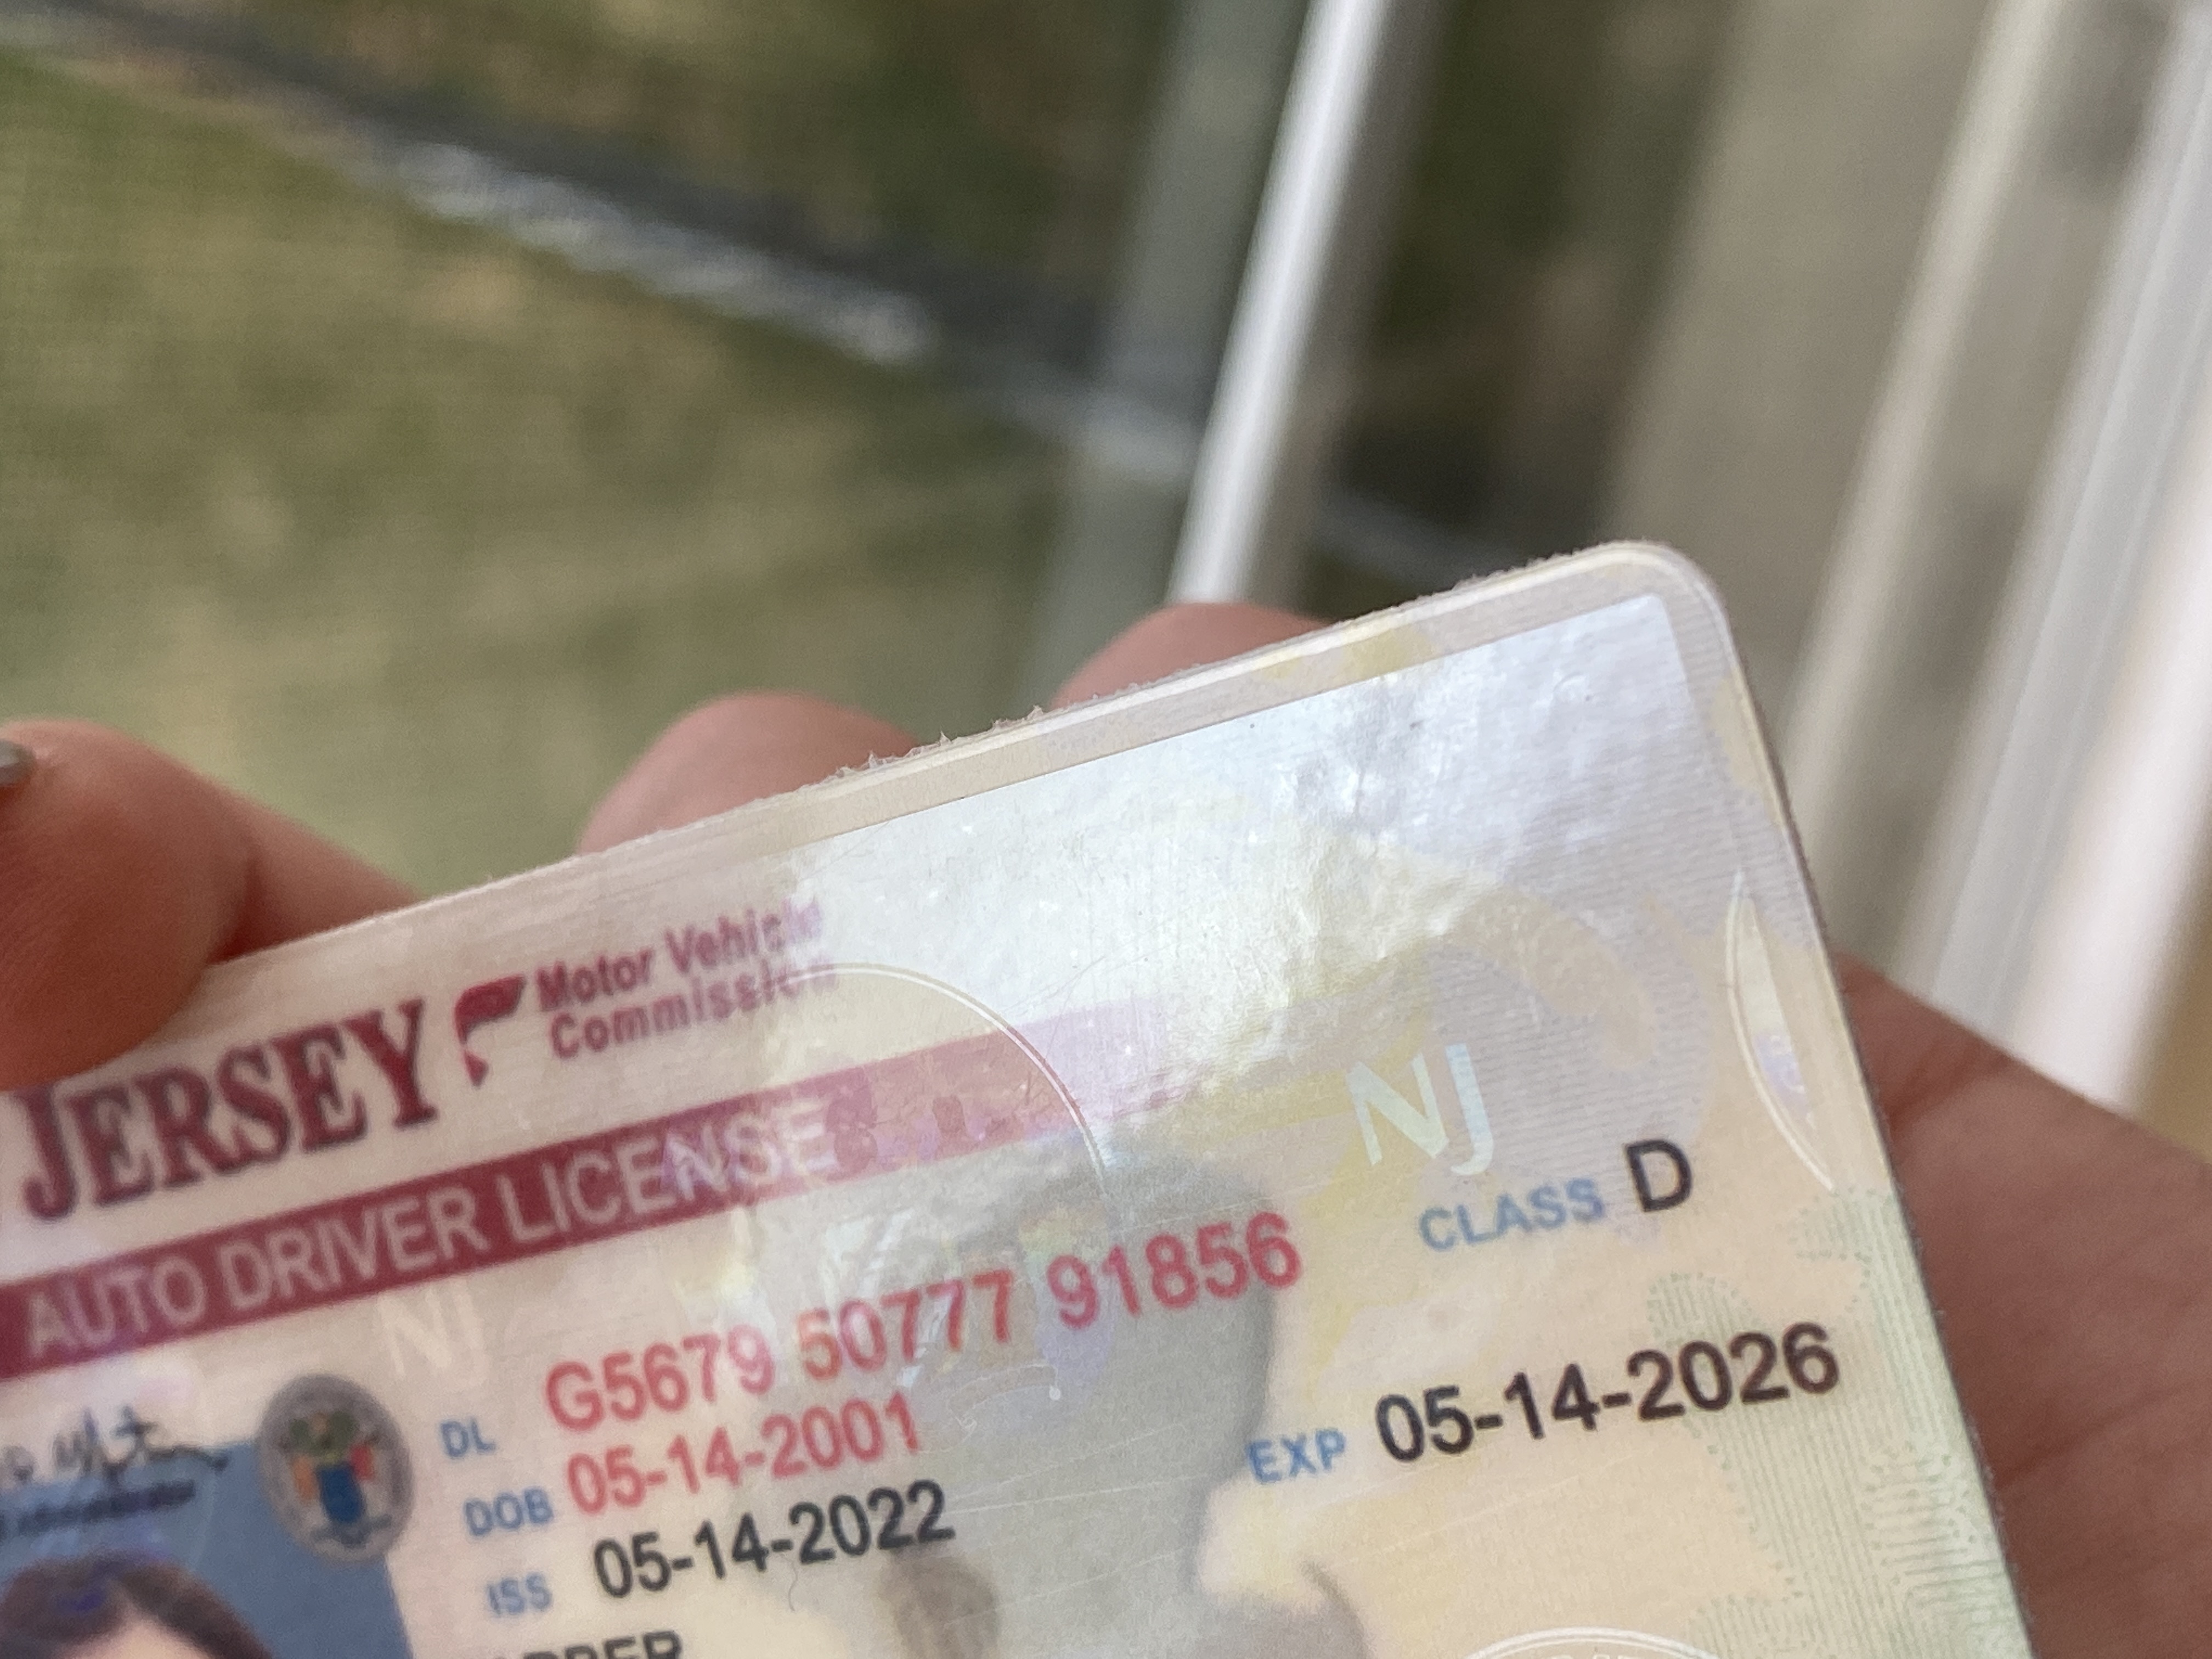 old ironside fake id review